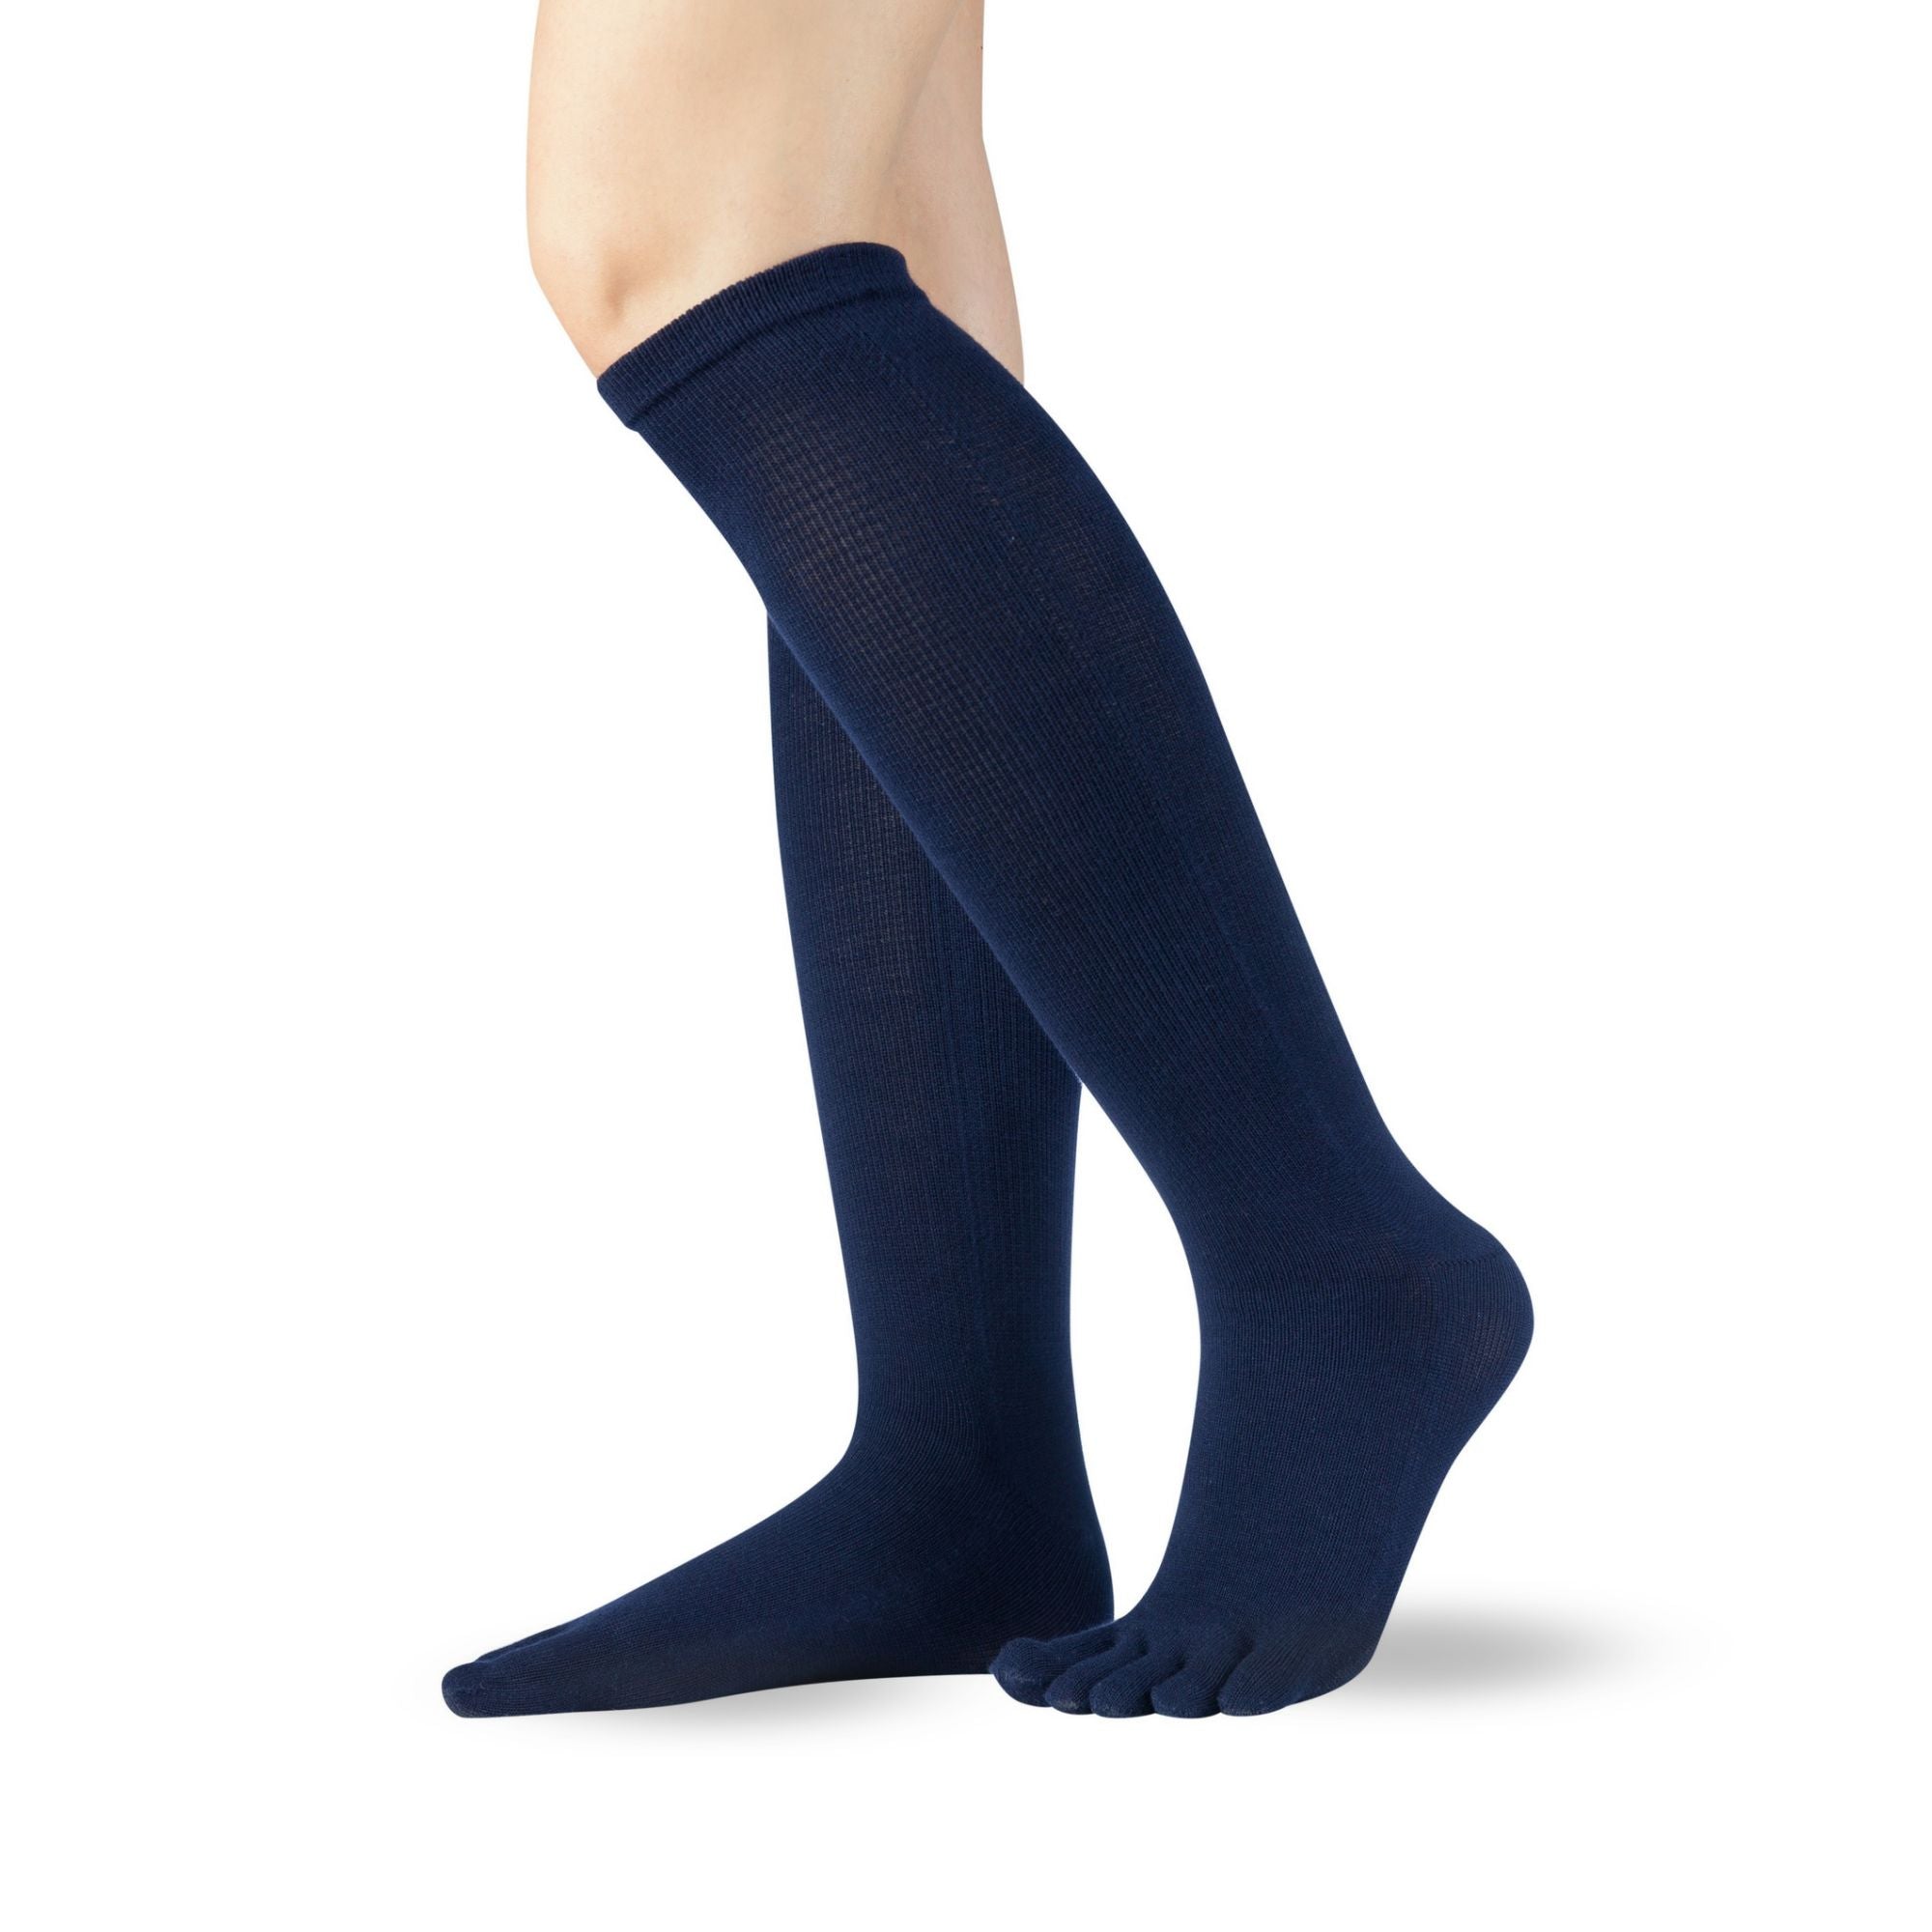 Knitido Essentials toe stockings (cotton) knee-length from the side in Navy